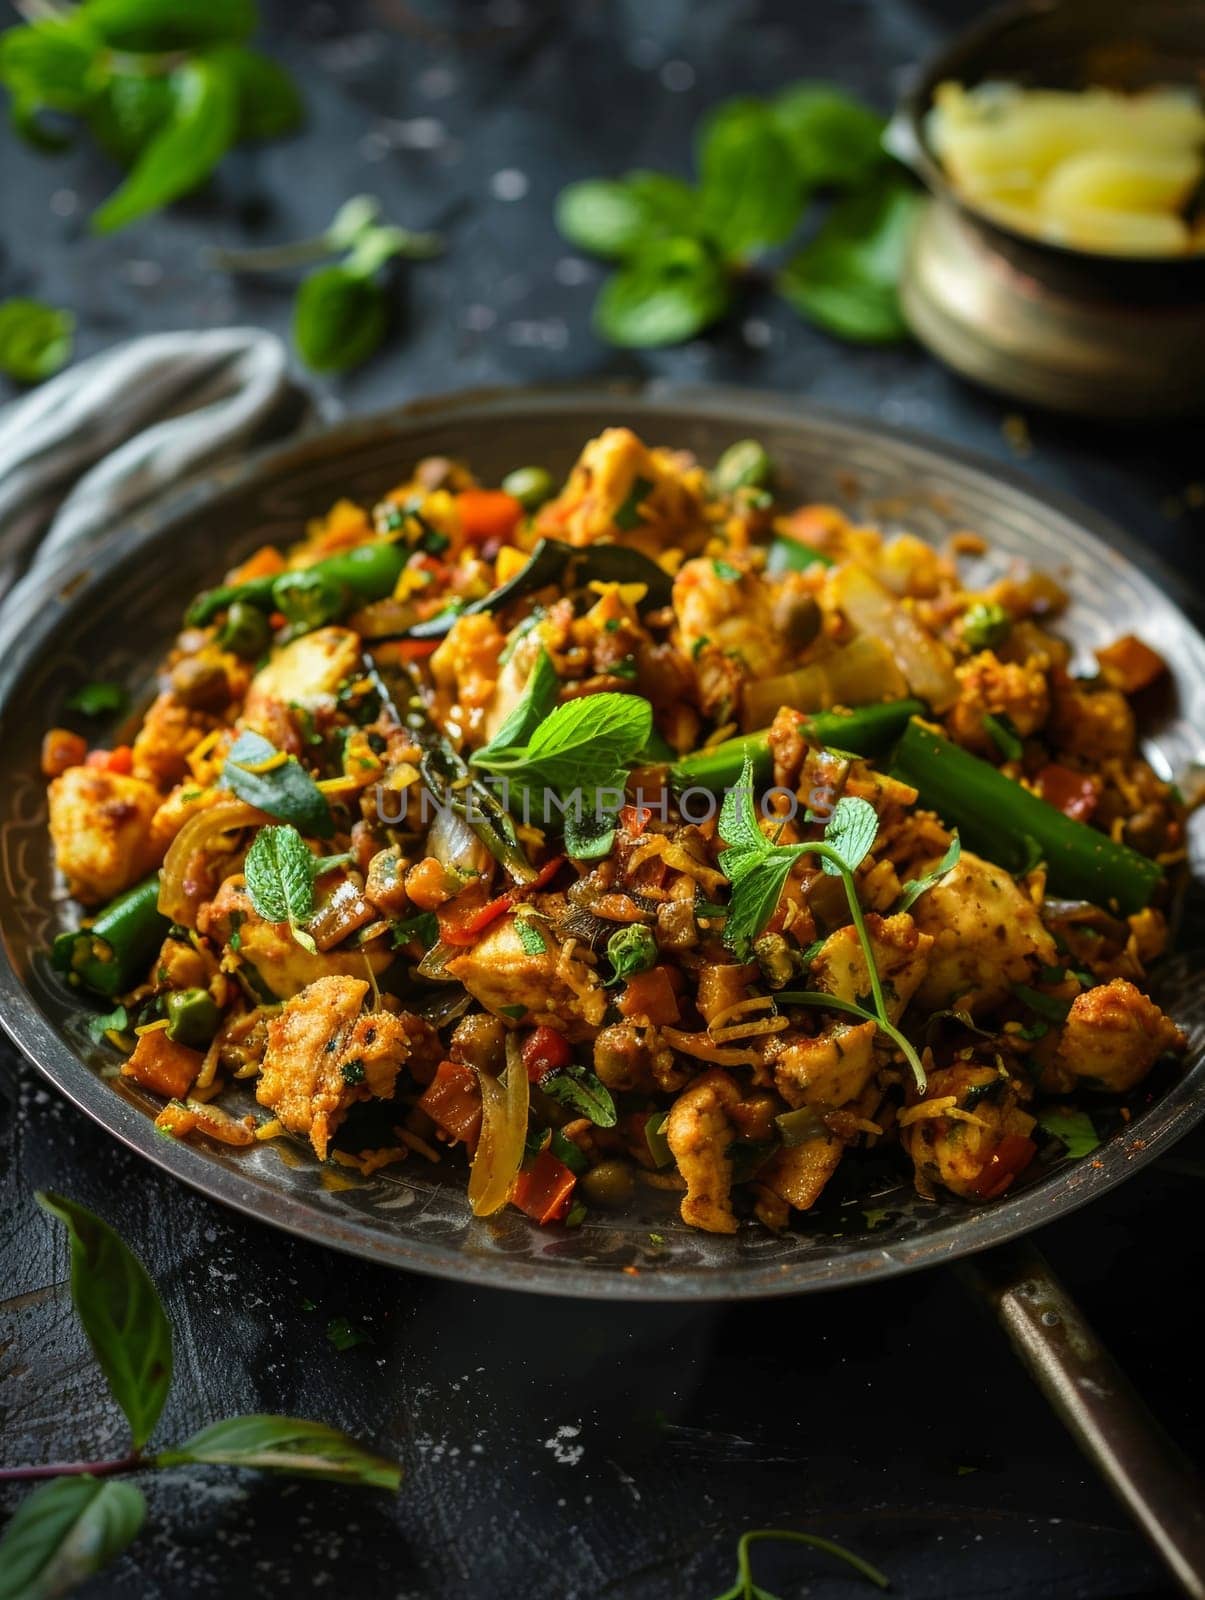 Sri Lankan kottu, a flavorful stir-fry of chopped roti bread, vegetables, and chicken, served on a metal plate. This vibrant and aromatic dish showcases the bold, spicy tastes of traditional cuisine